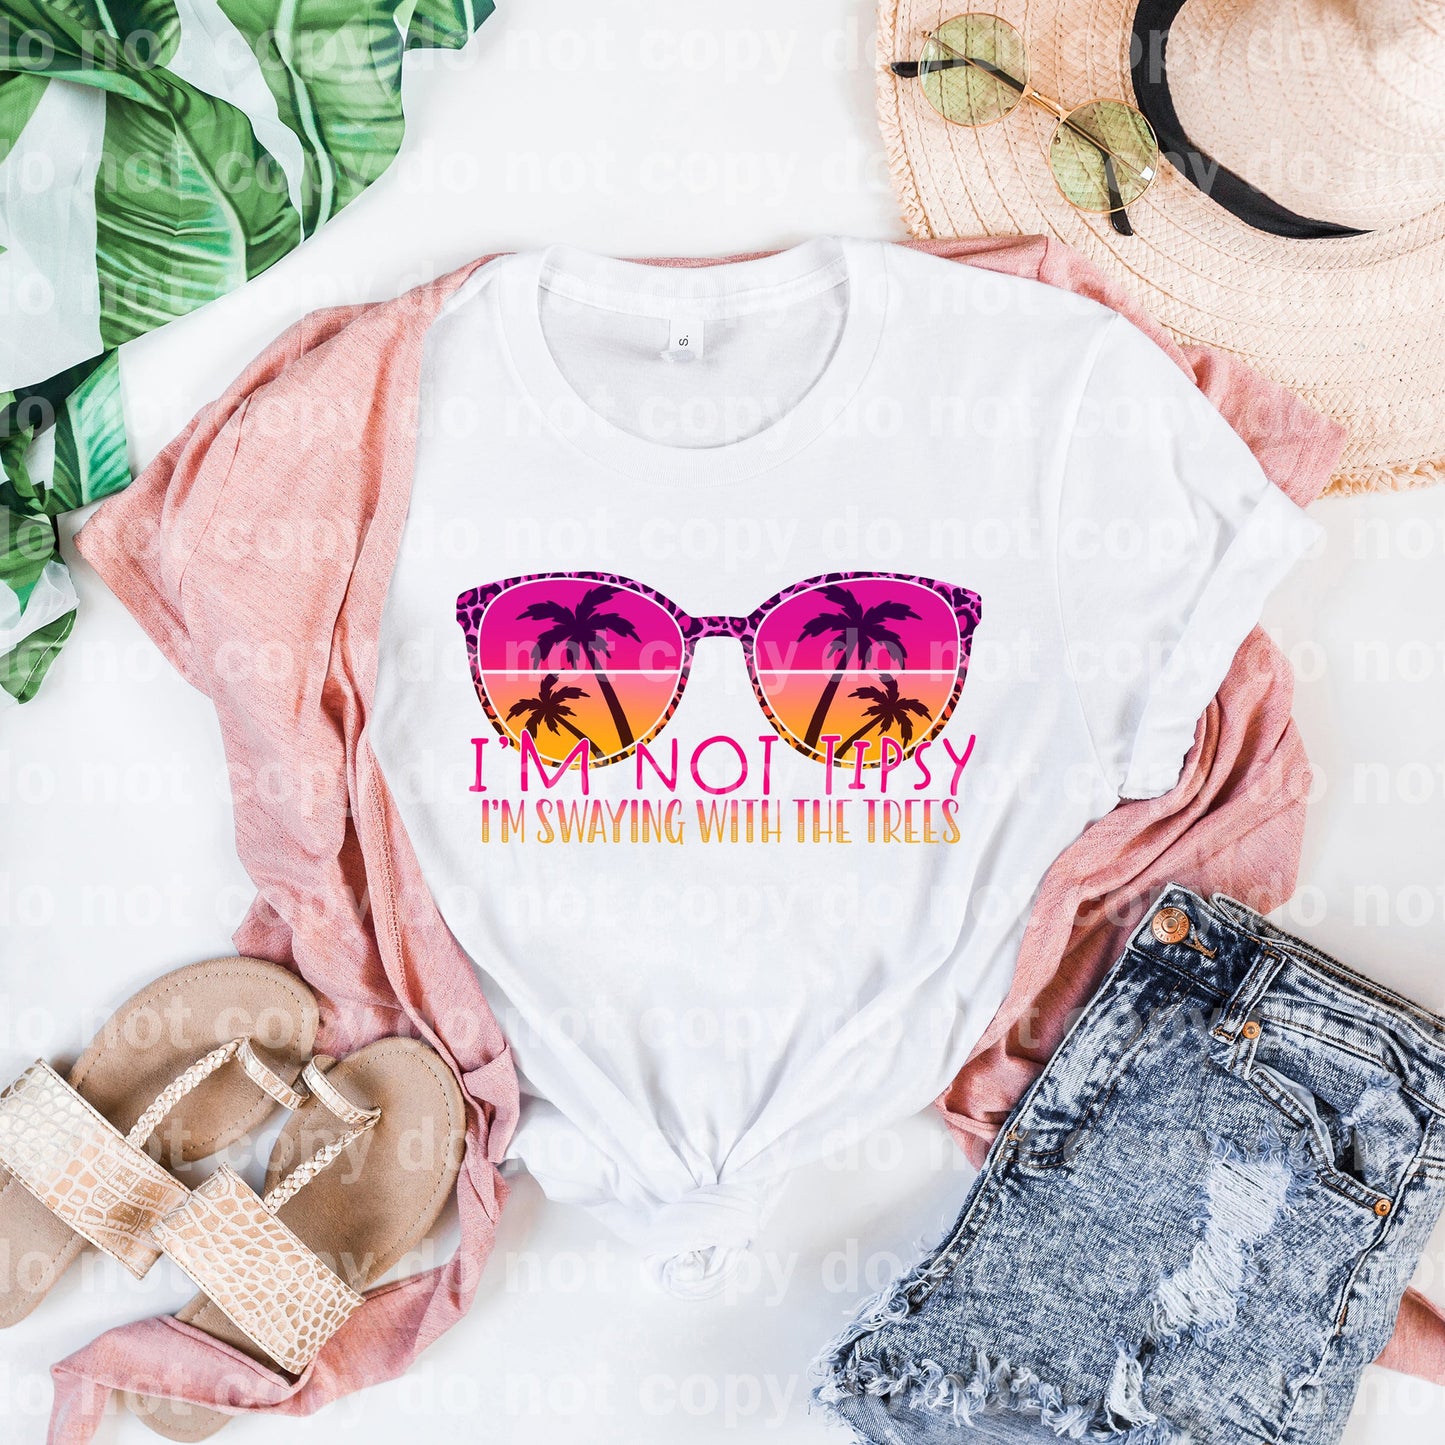 I'm Not Tipsy I'm Swaying with The Trees Pink /Monochrome Dream Print or Sublimation Print